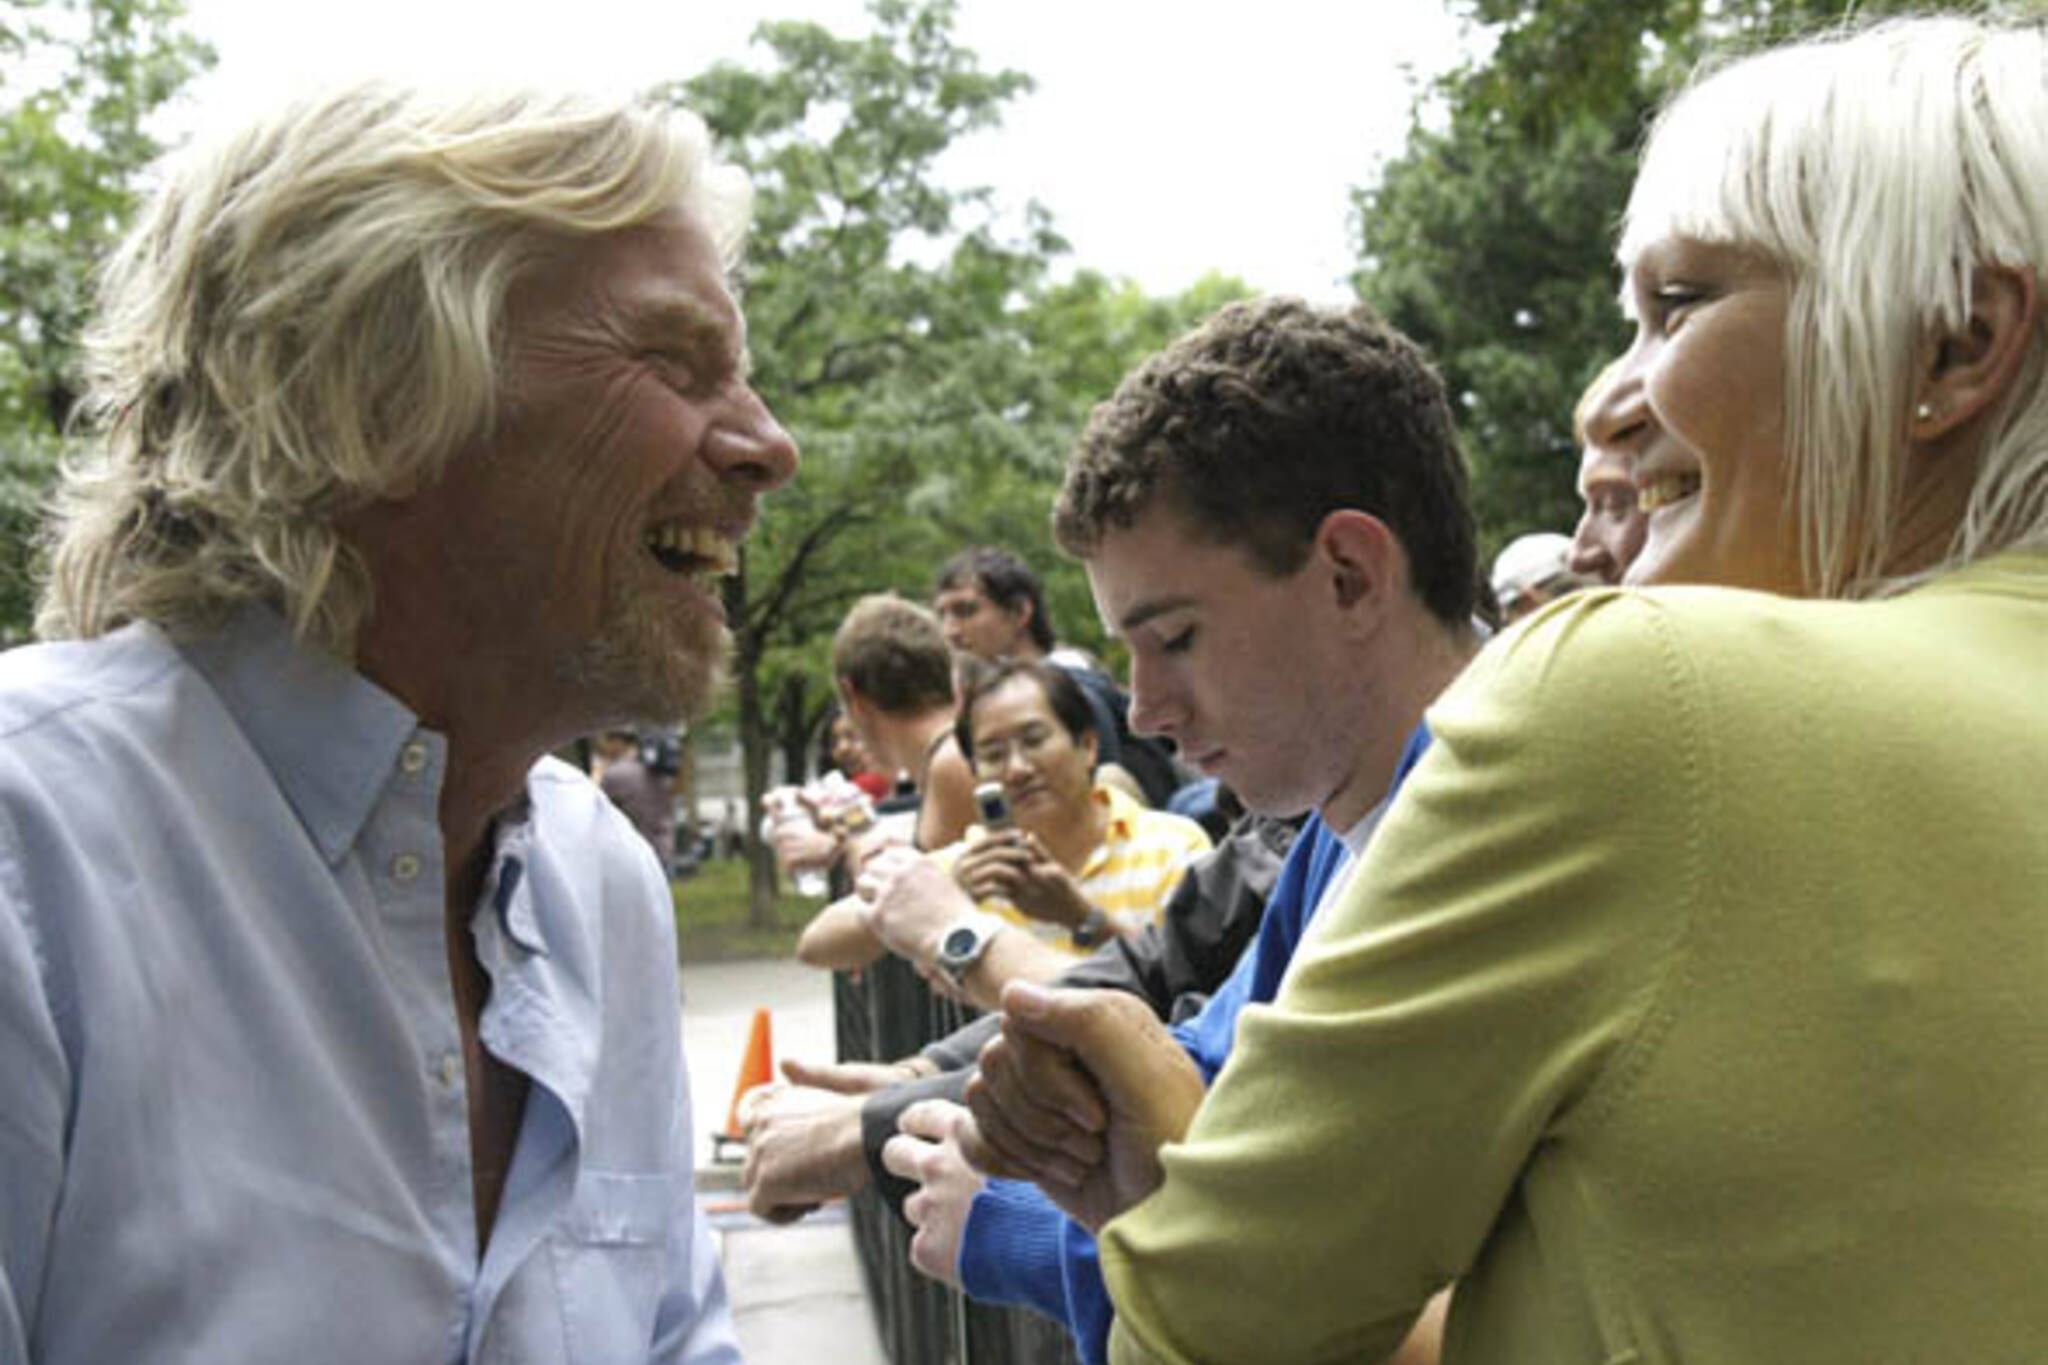 Richard Branson meets his fans at the Virgin Music Festival in Toronto